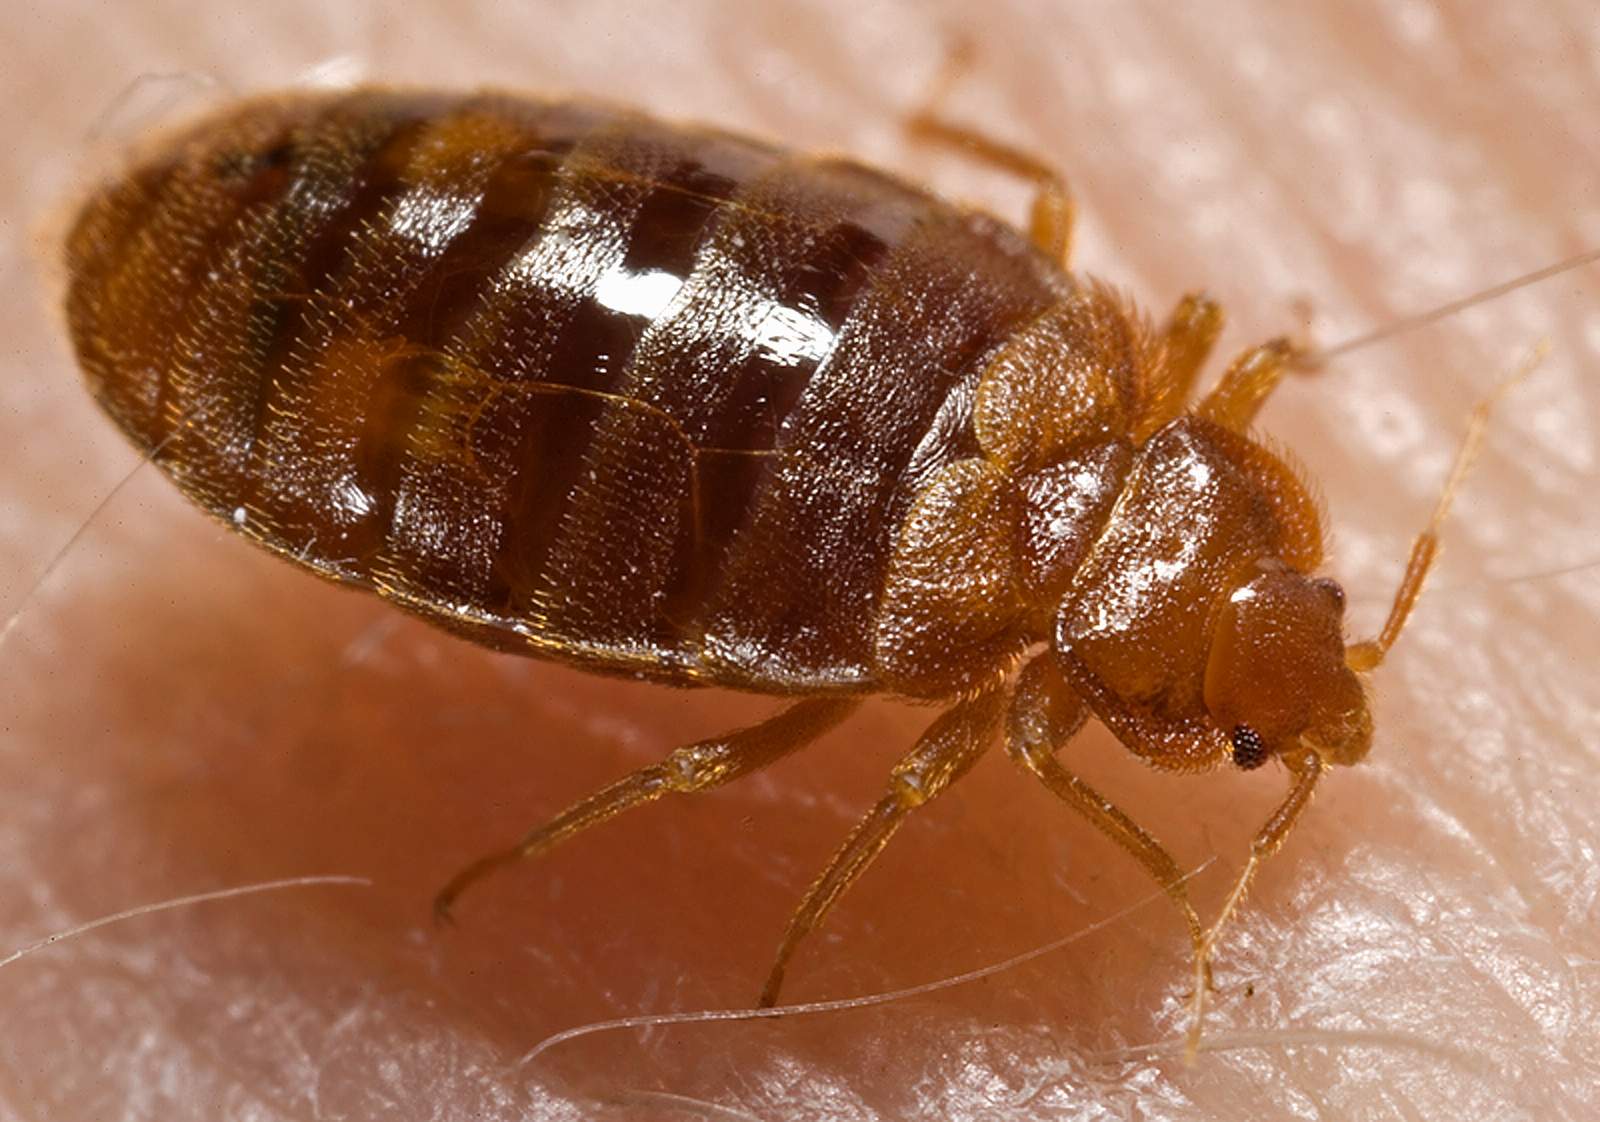 Very close up shot of bed bug